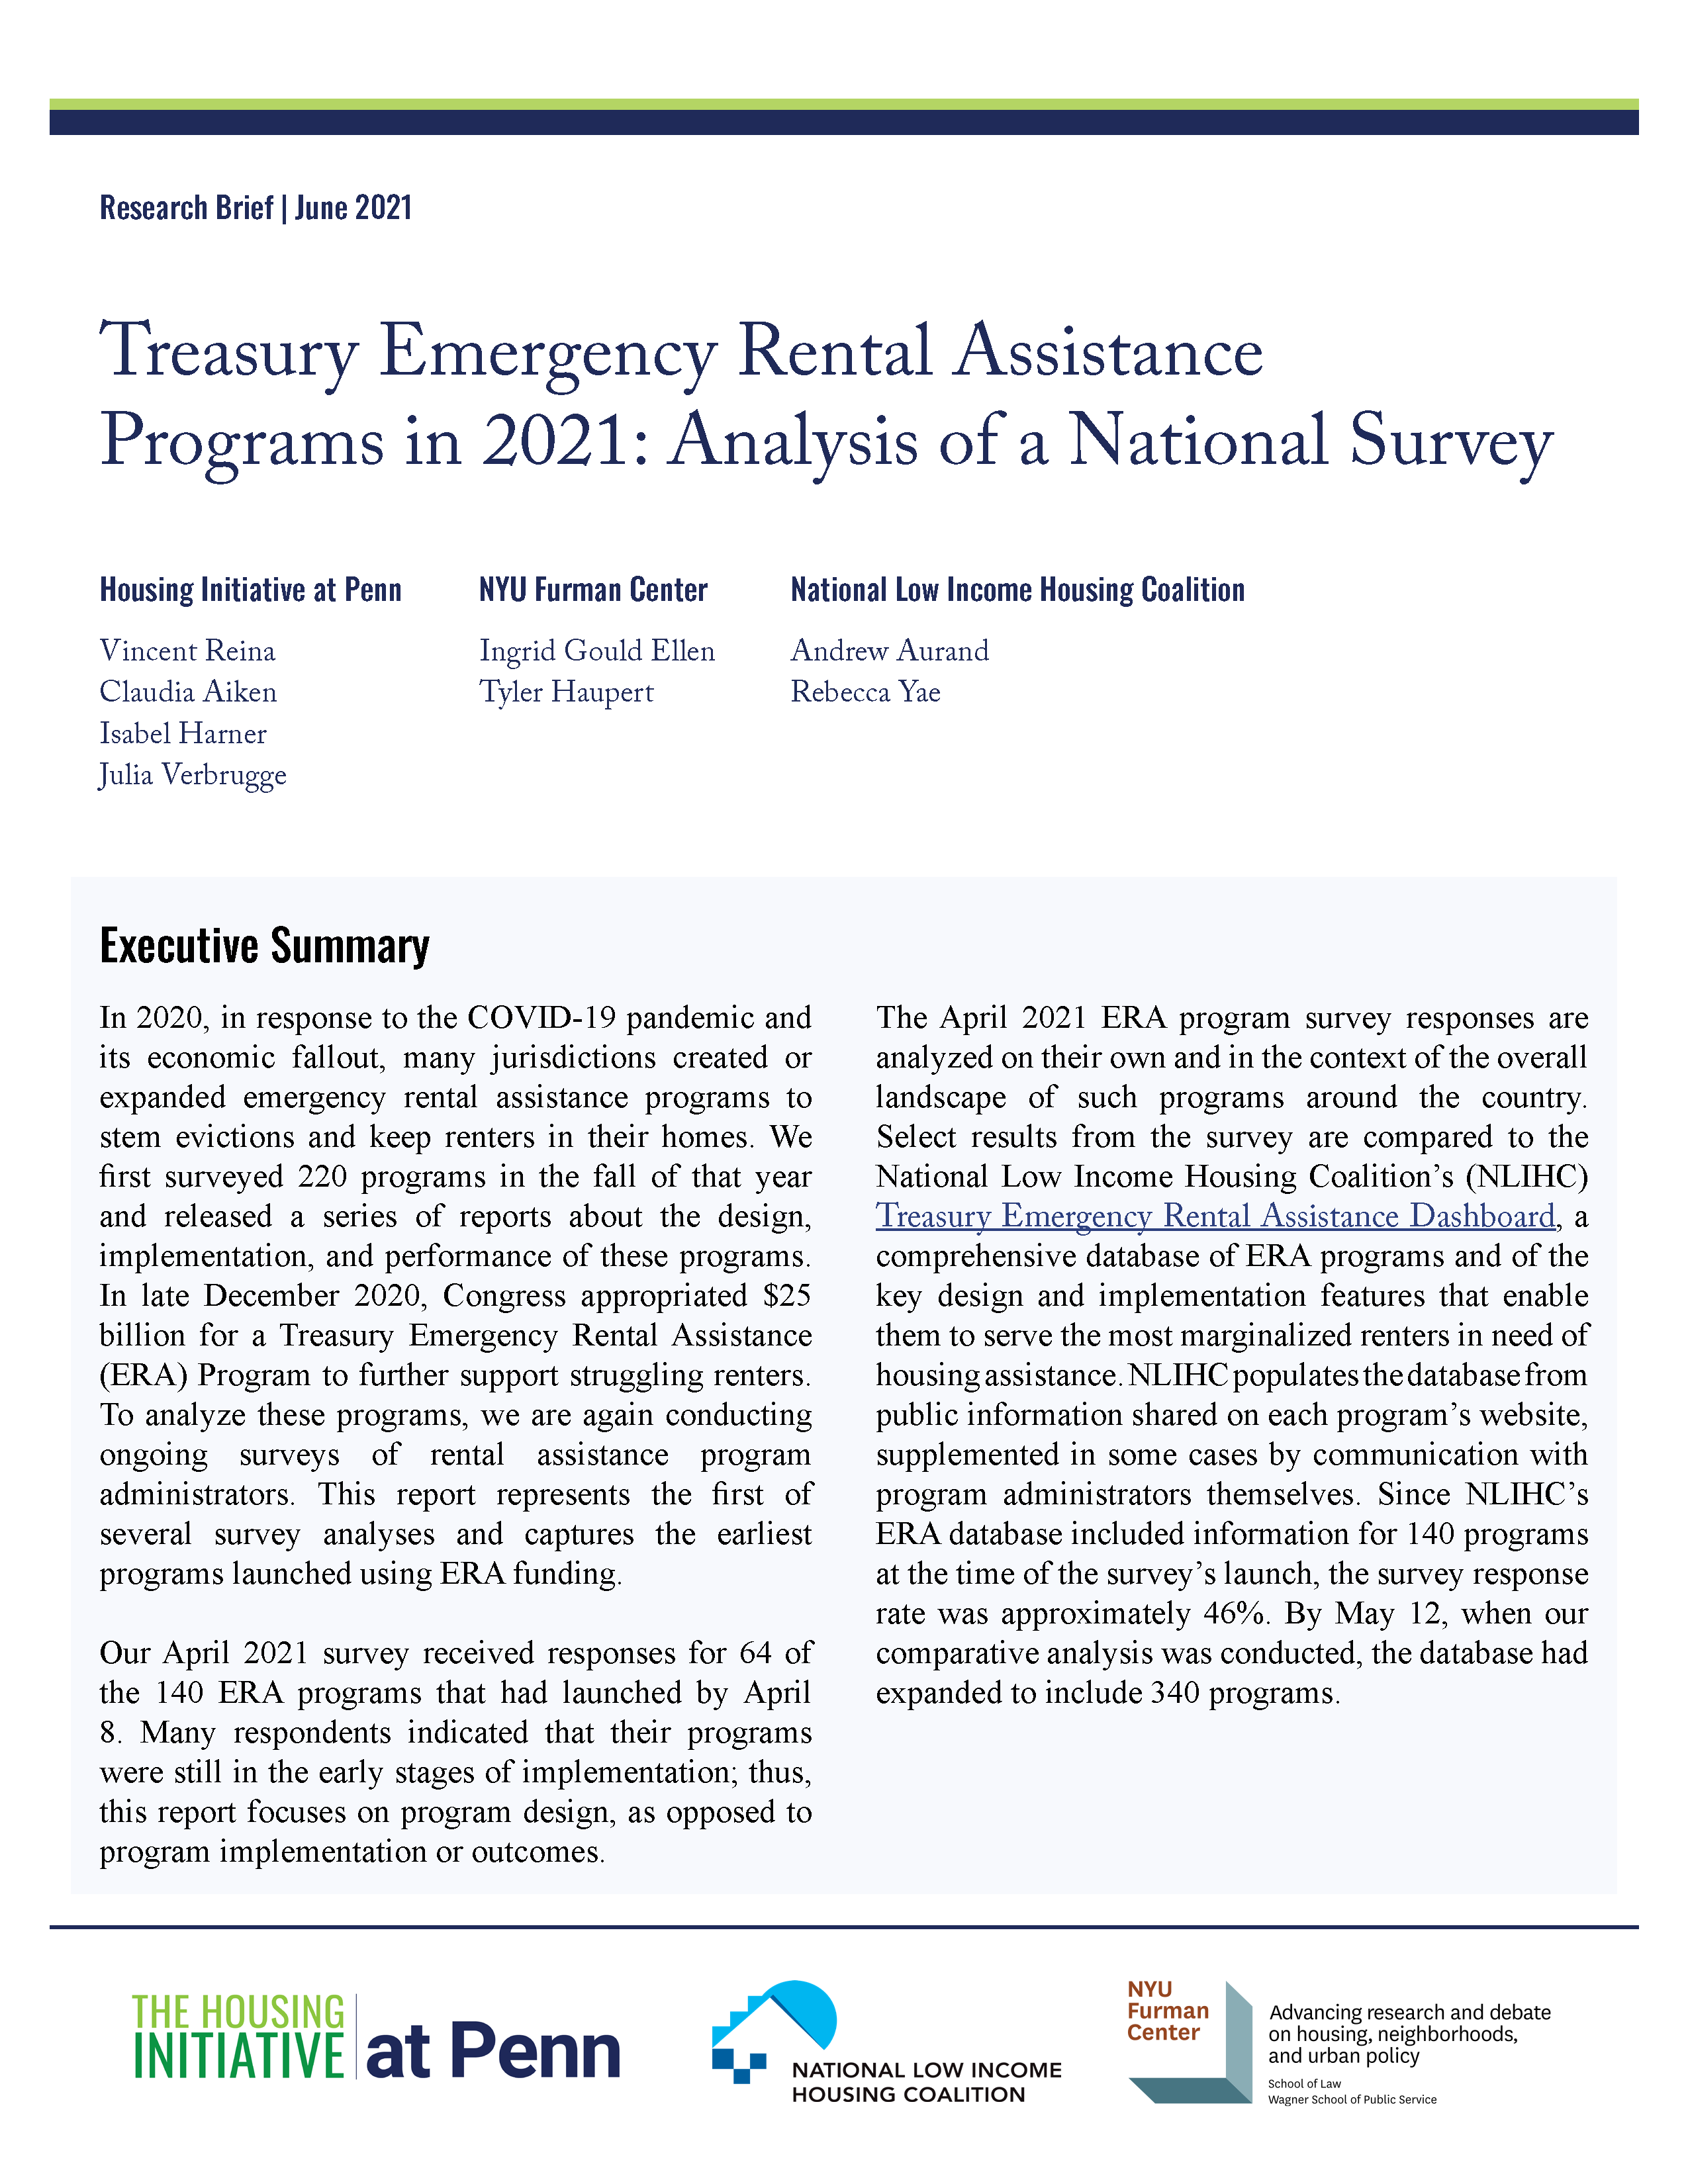 Treasury Emergency Rental Assistance Programs in 2021: Analysis of a National Survey